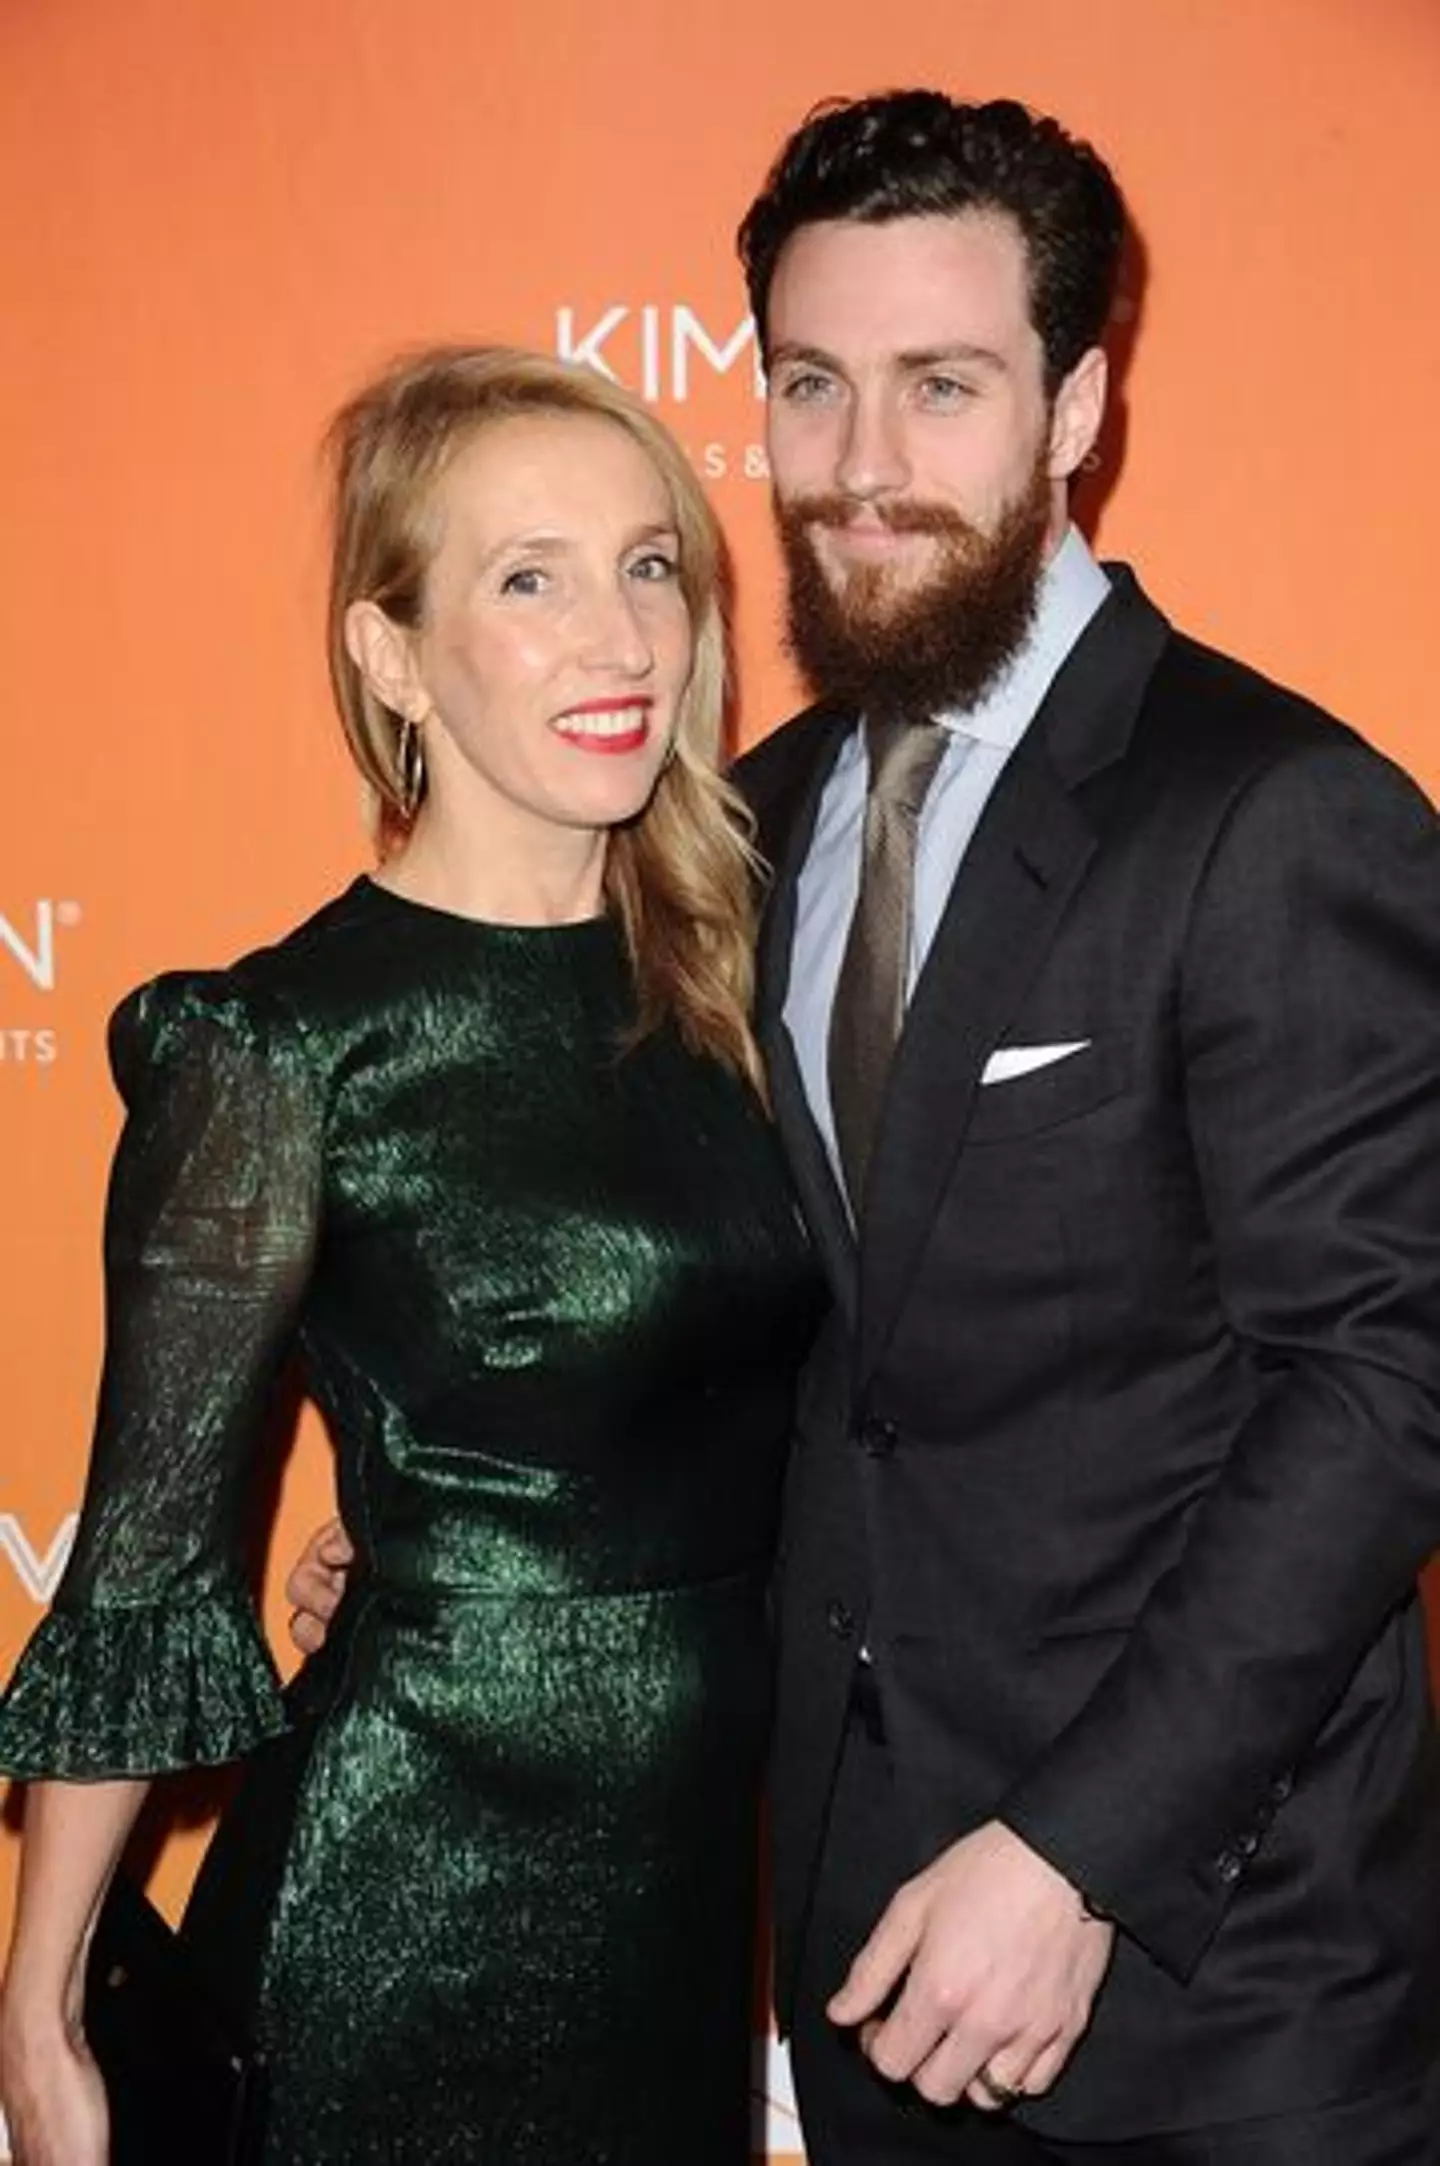 Aaron and Sam Taylor-Johnson have been married since 2012.